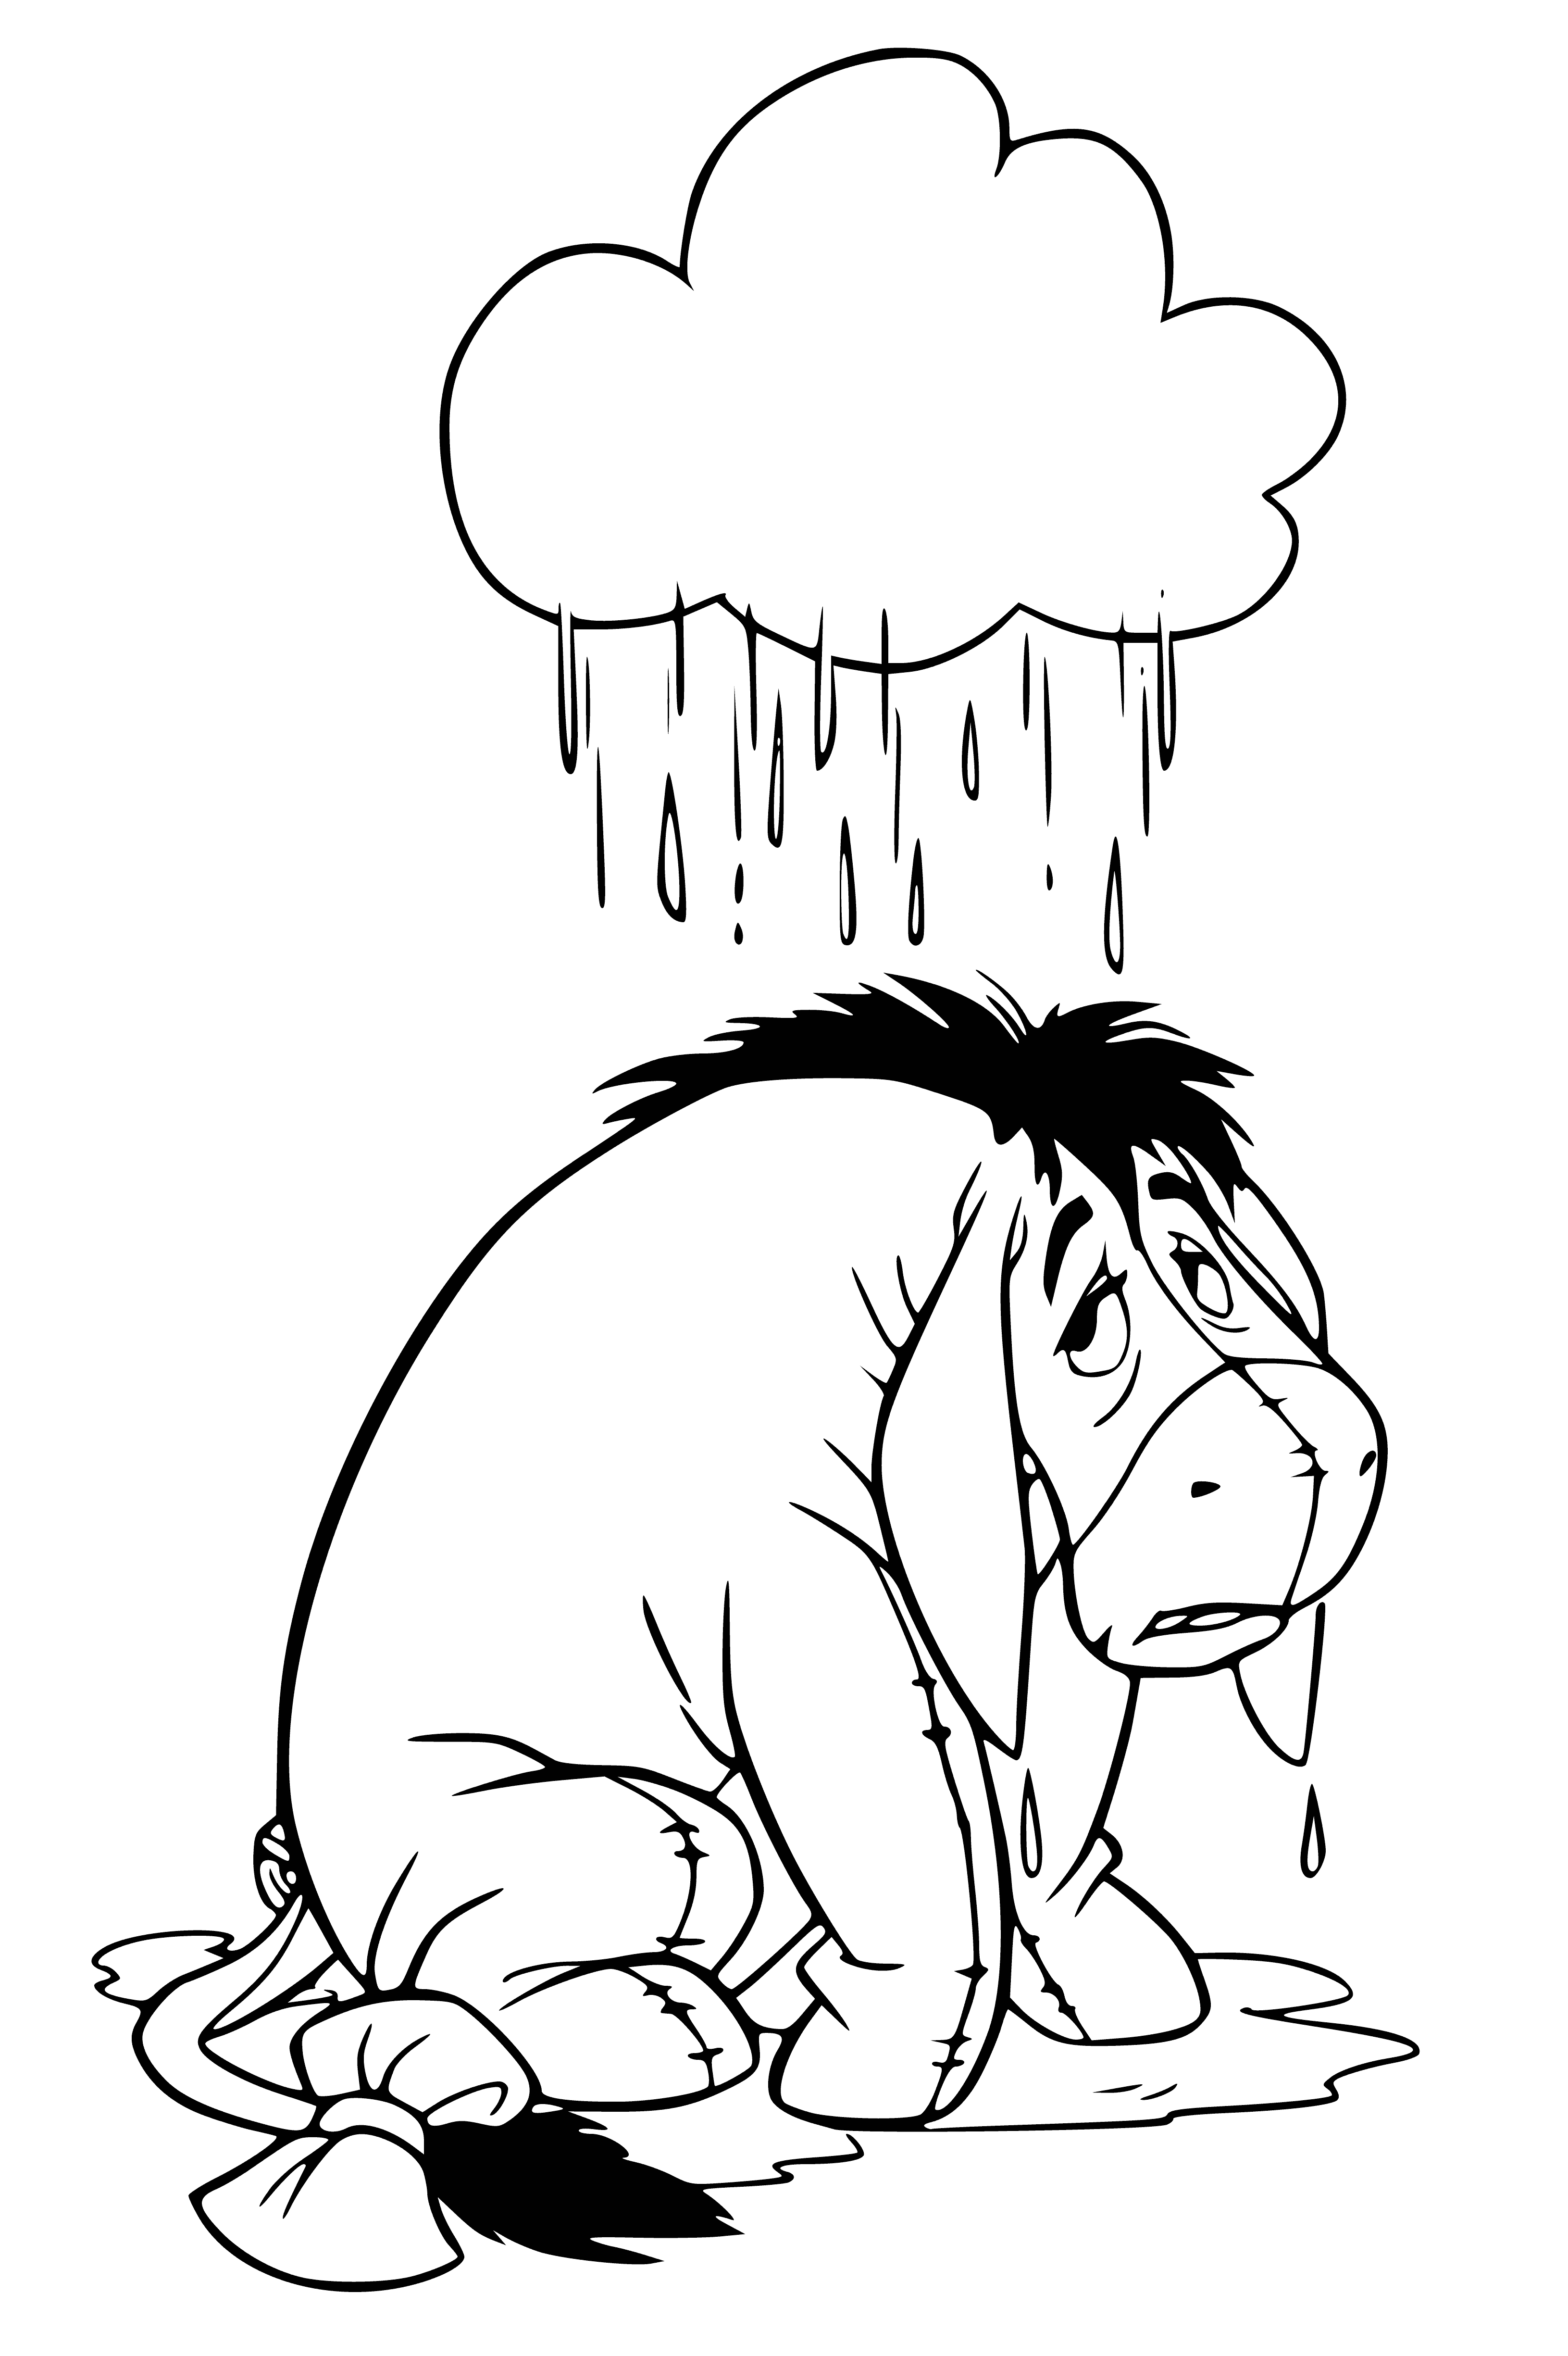 coloring page: Donkey stands in puddle of water in hard rain, getting soaked. #endangeredanimals #rainyday